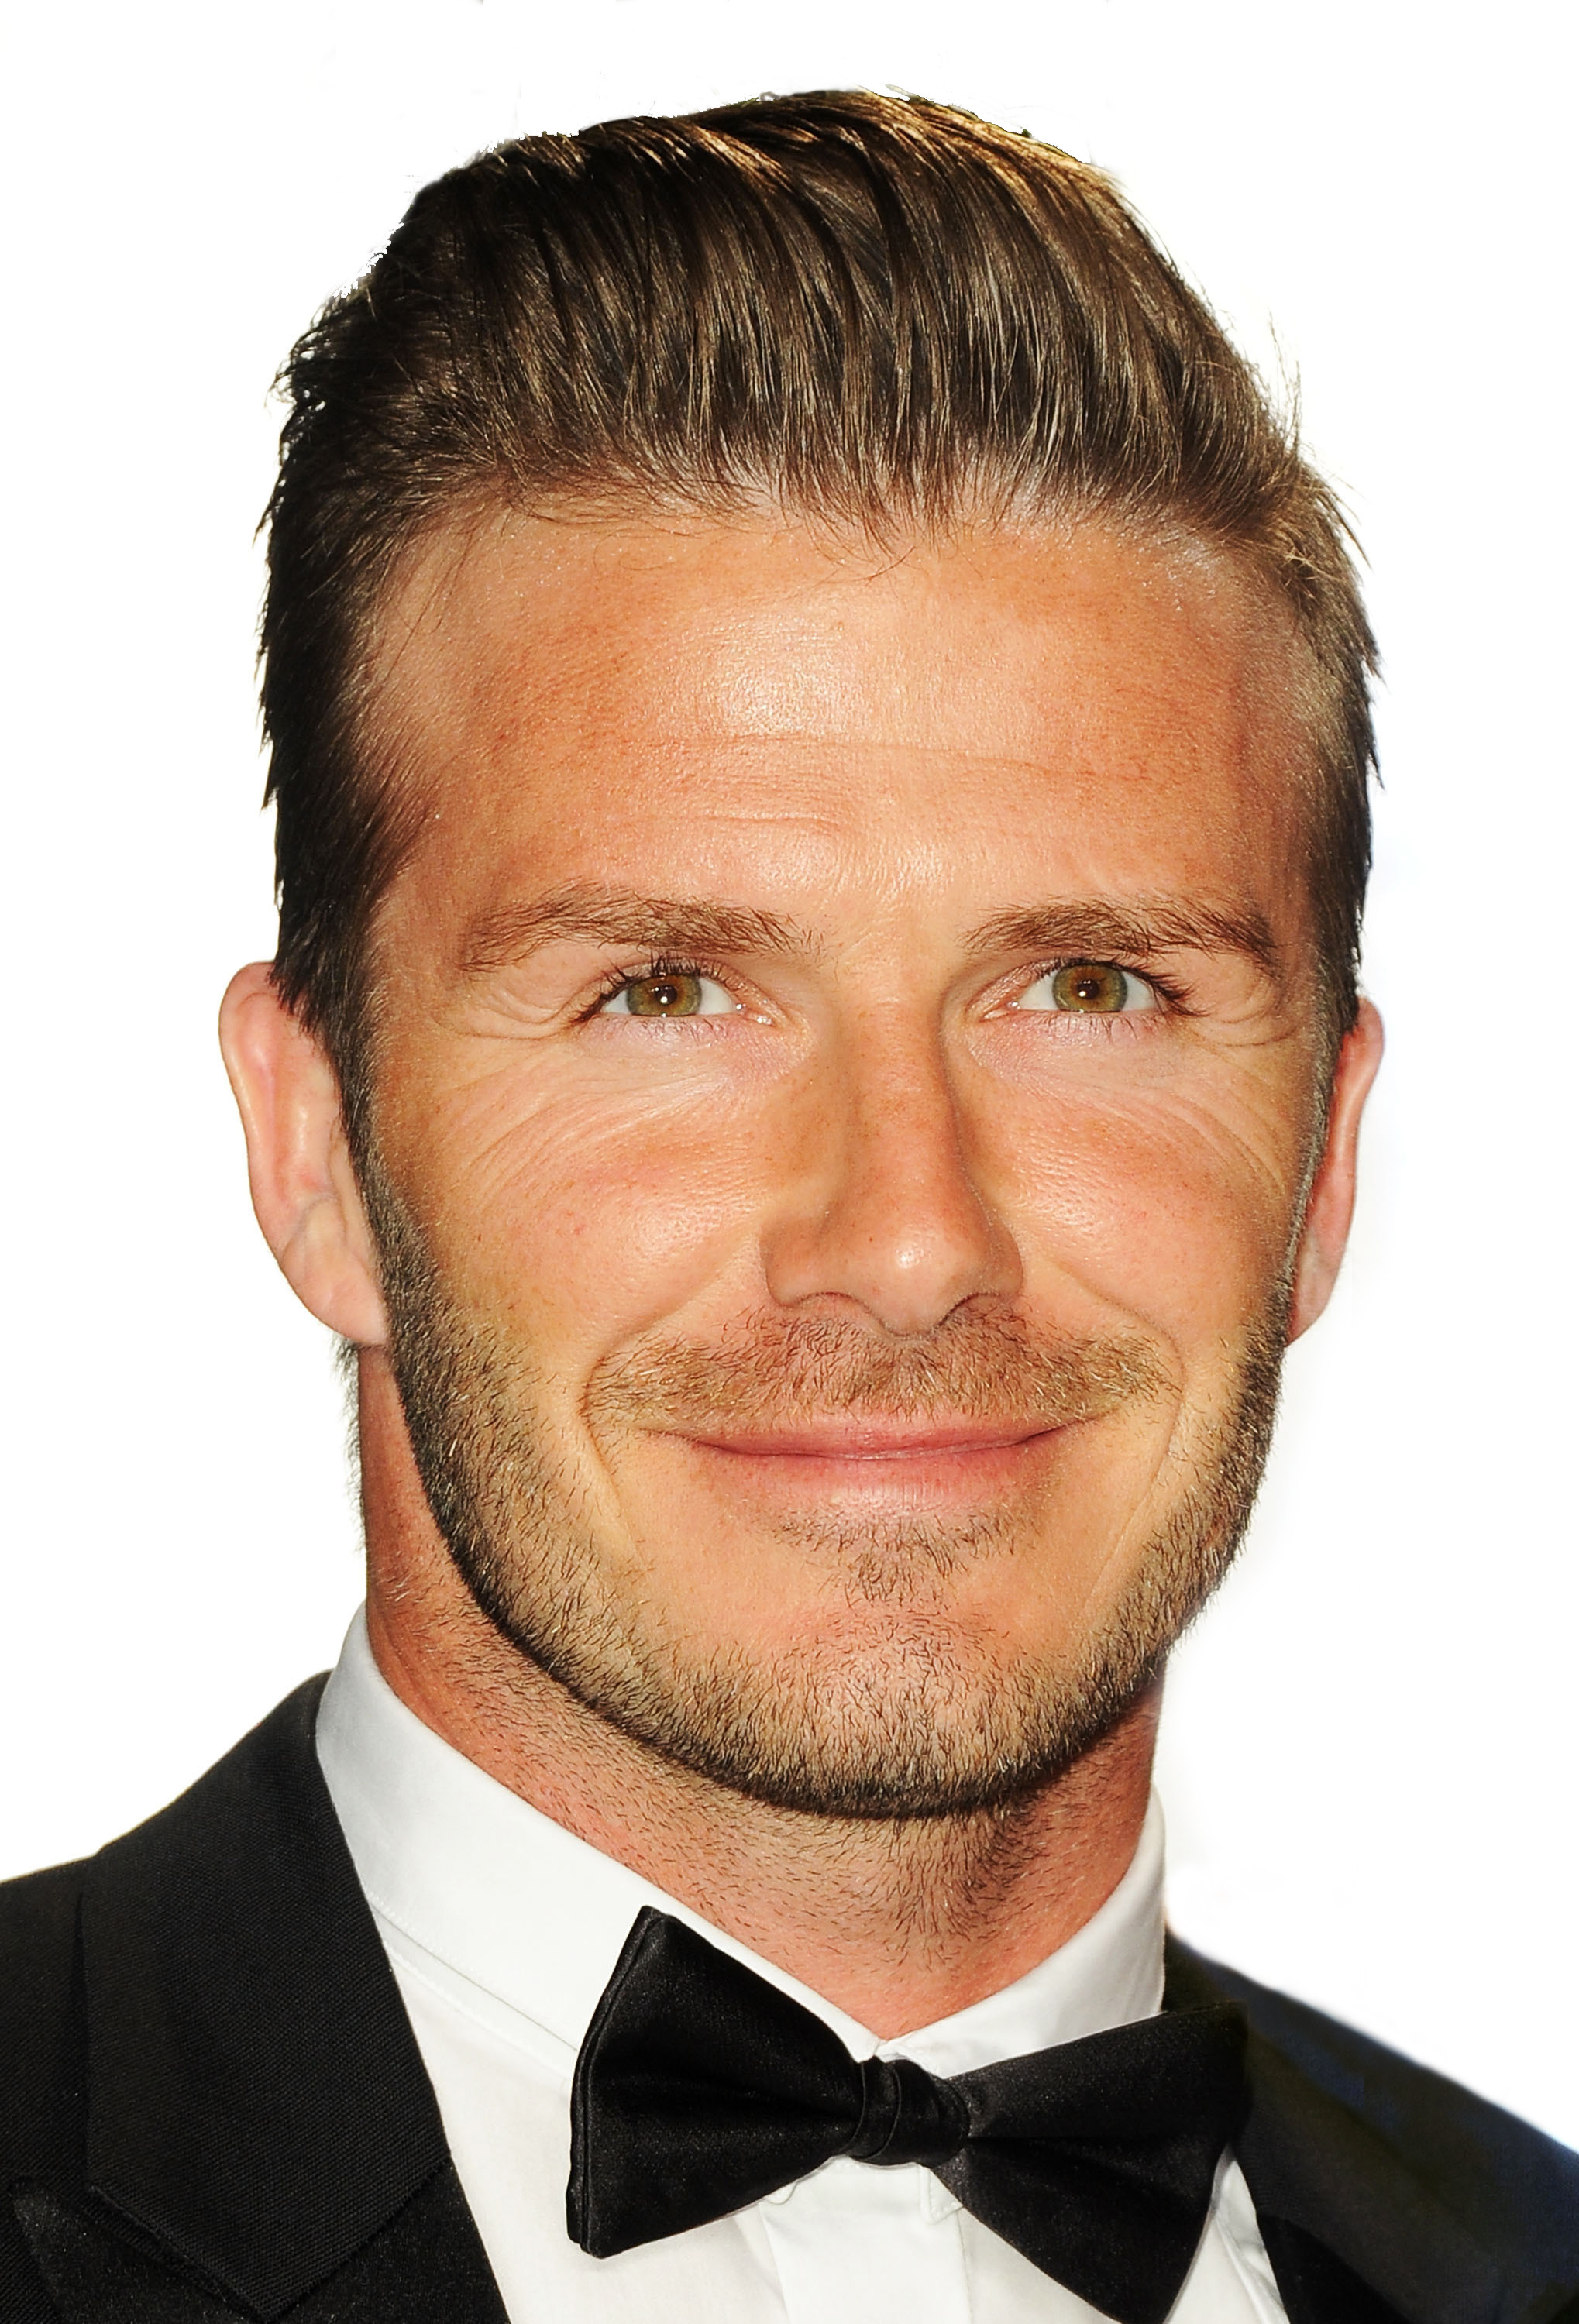 International Sports Star David Beckham To Be Honored With The